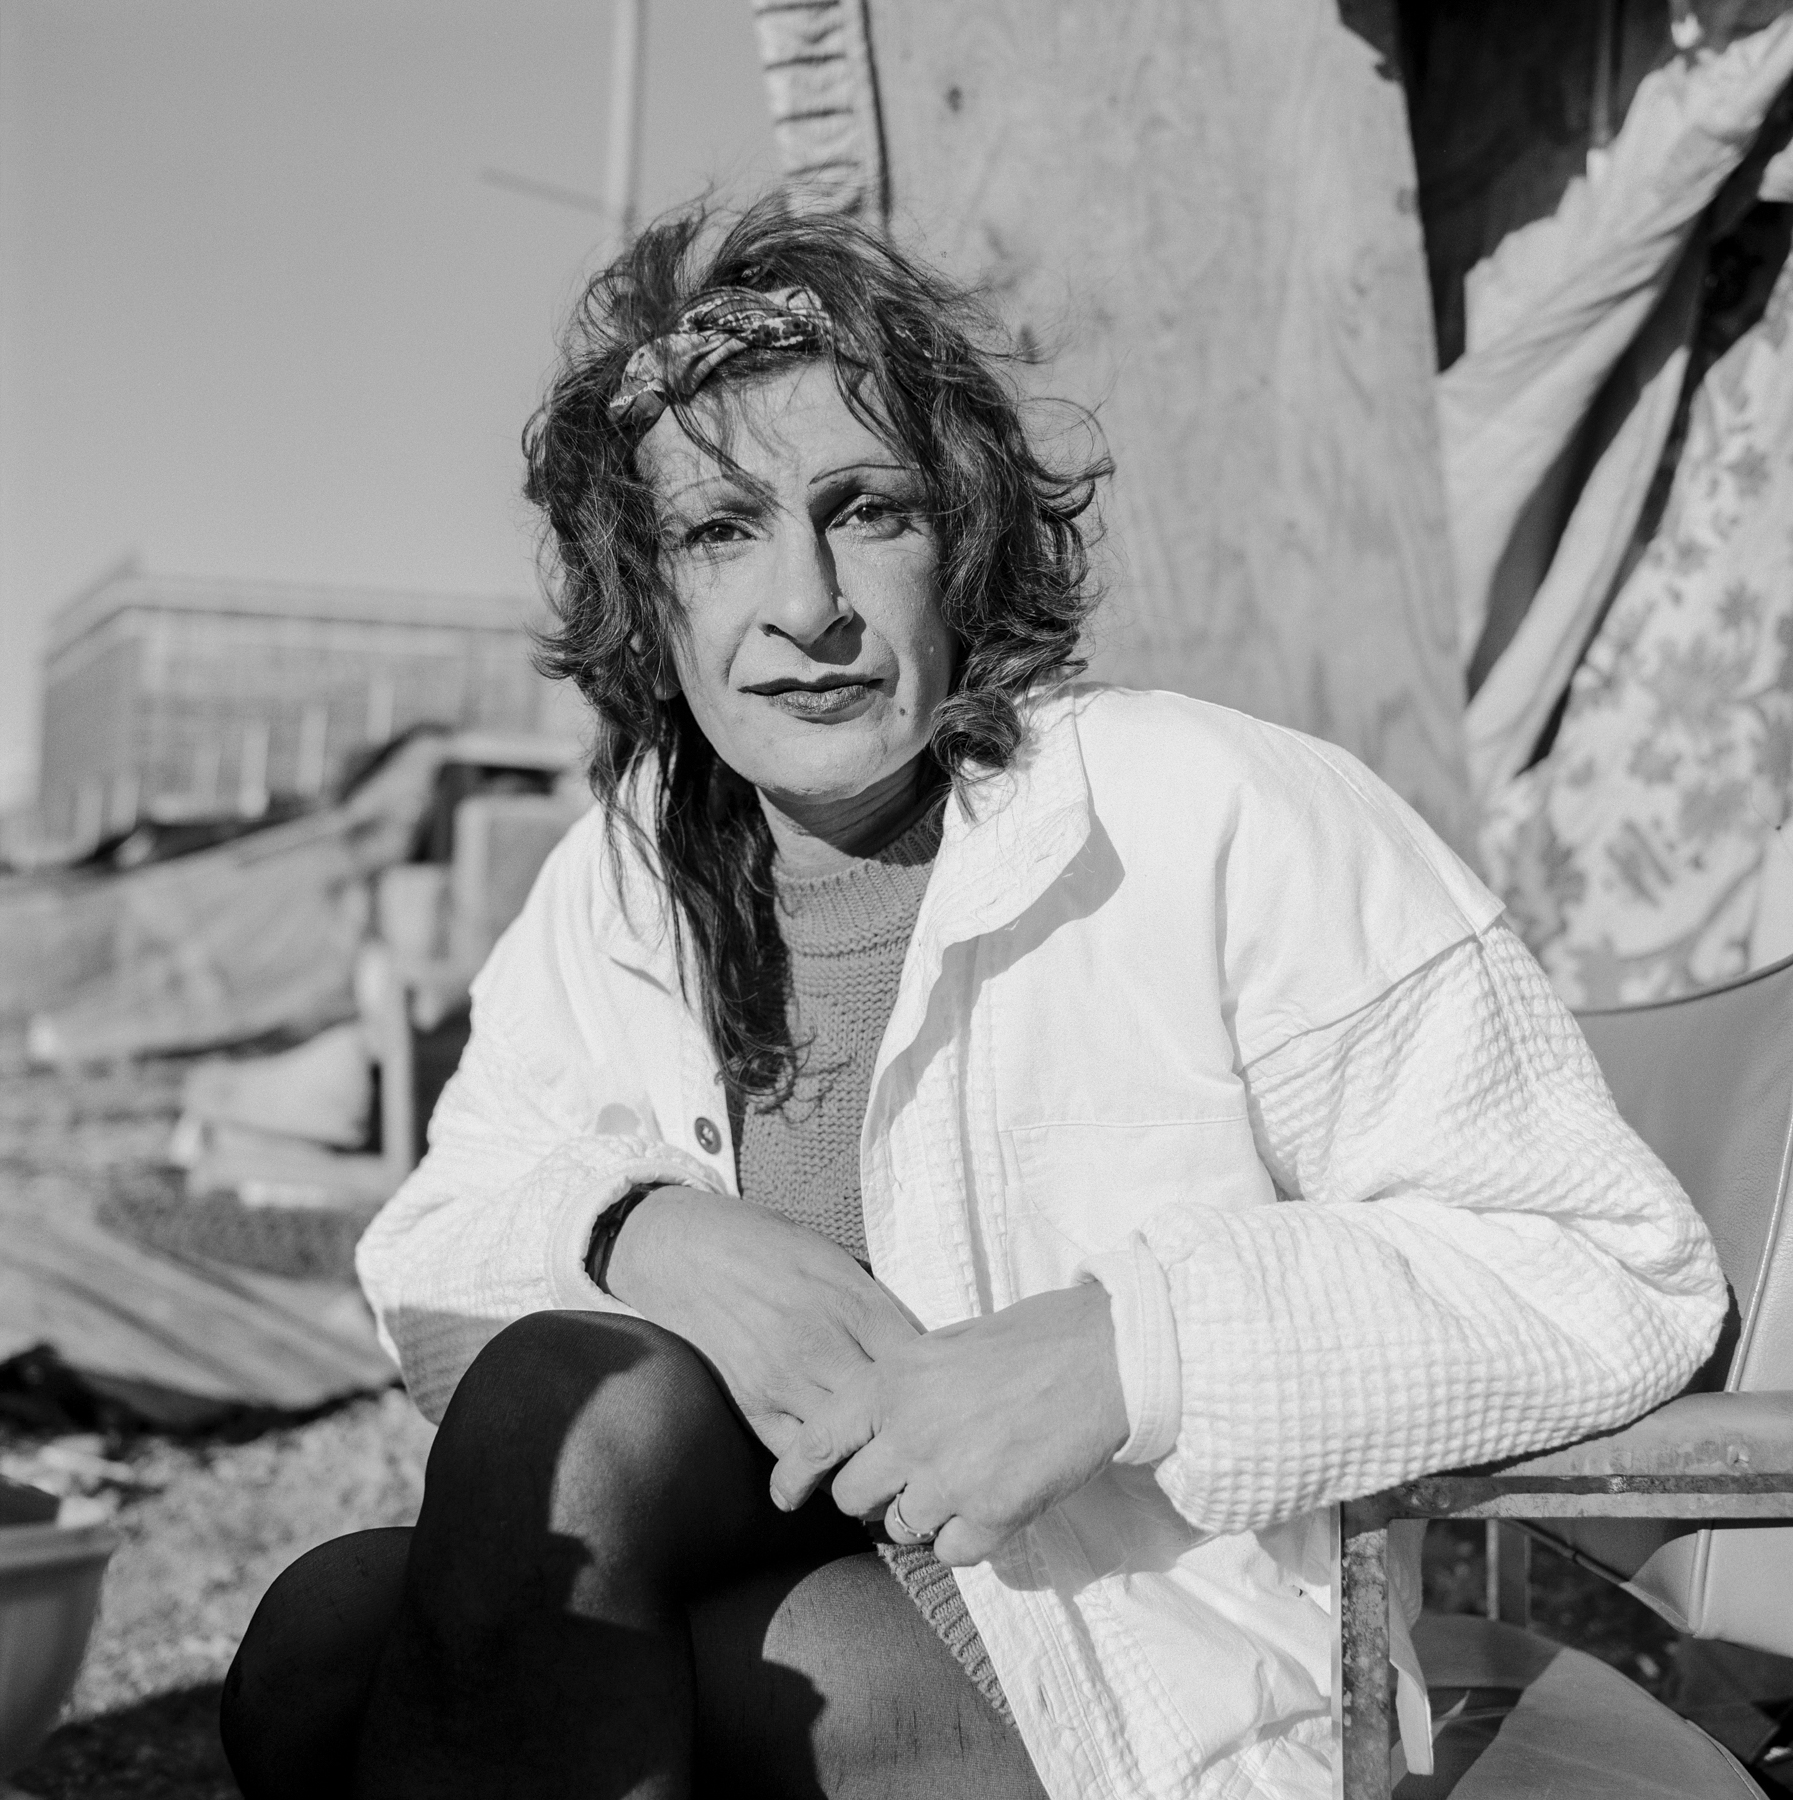 Sylvia Rivera at her Hudson riverfront home encampment in New York in 1996